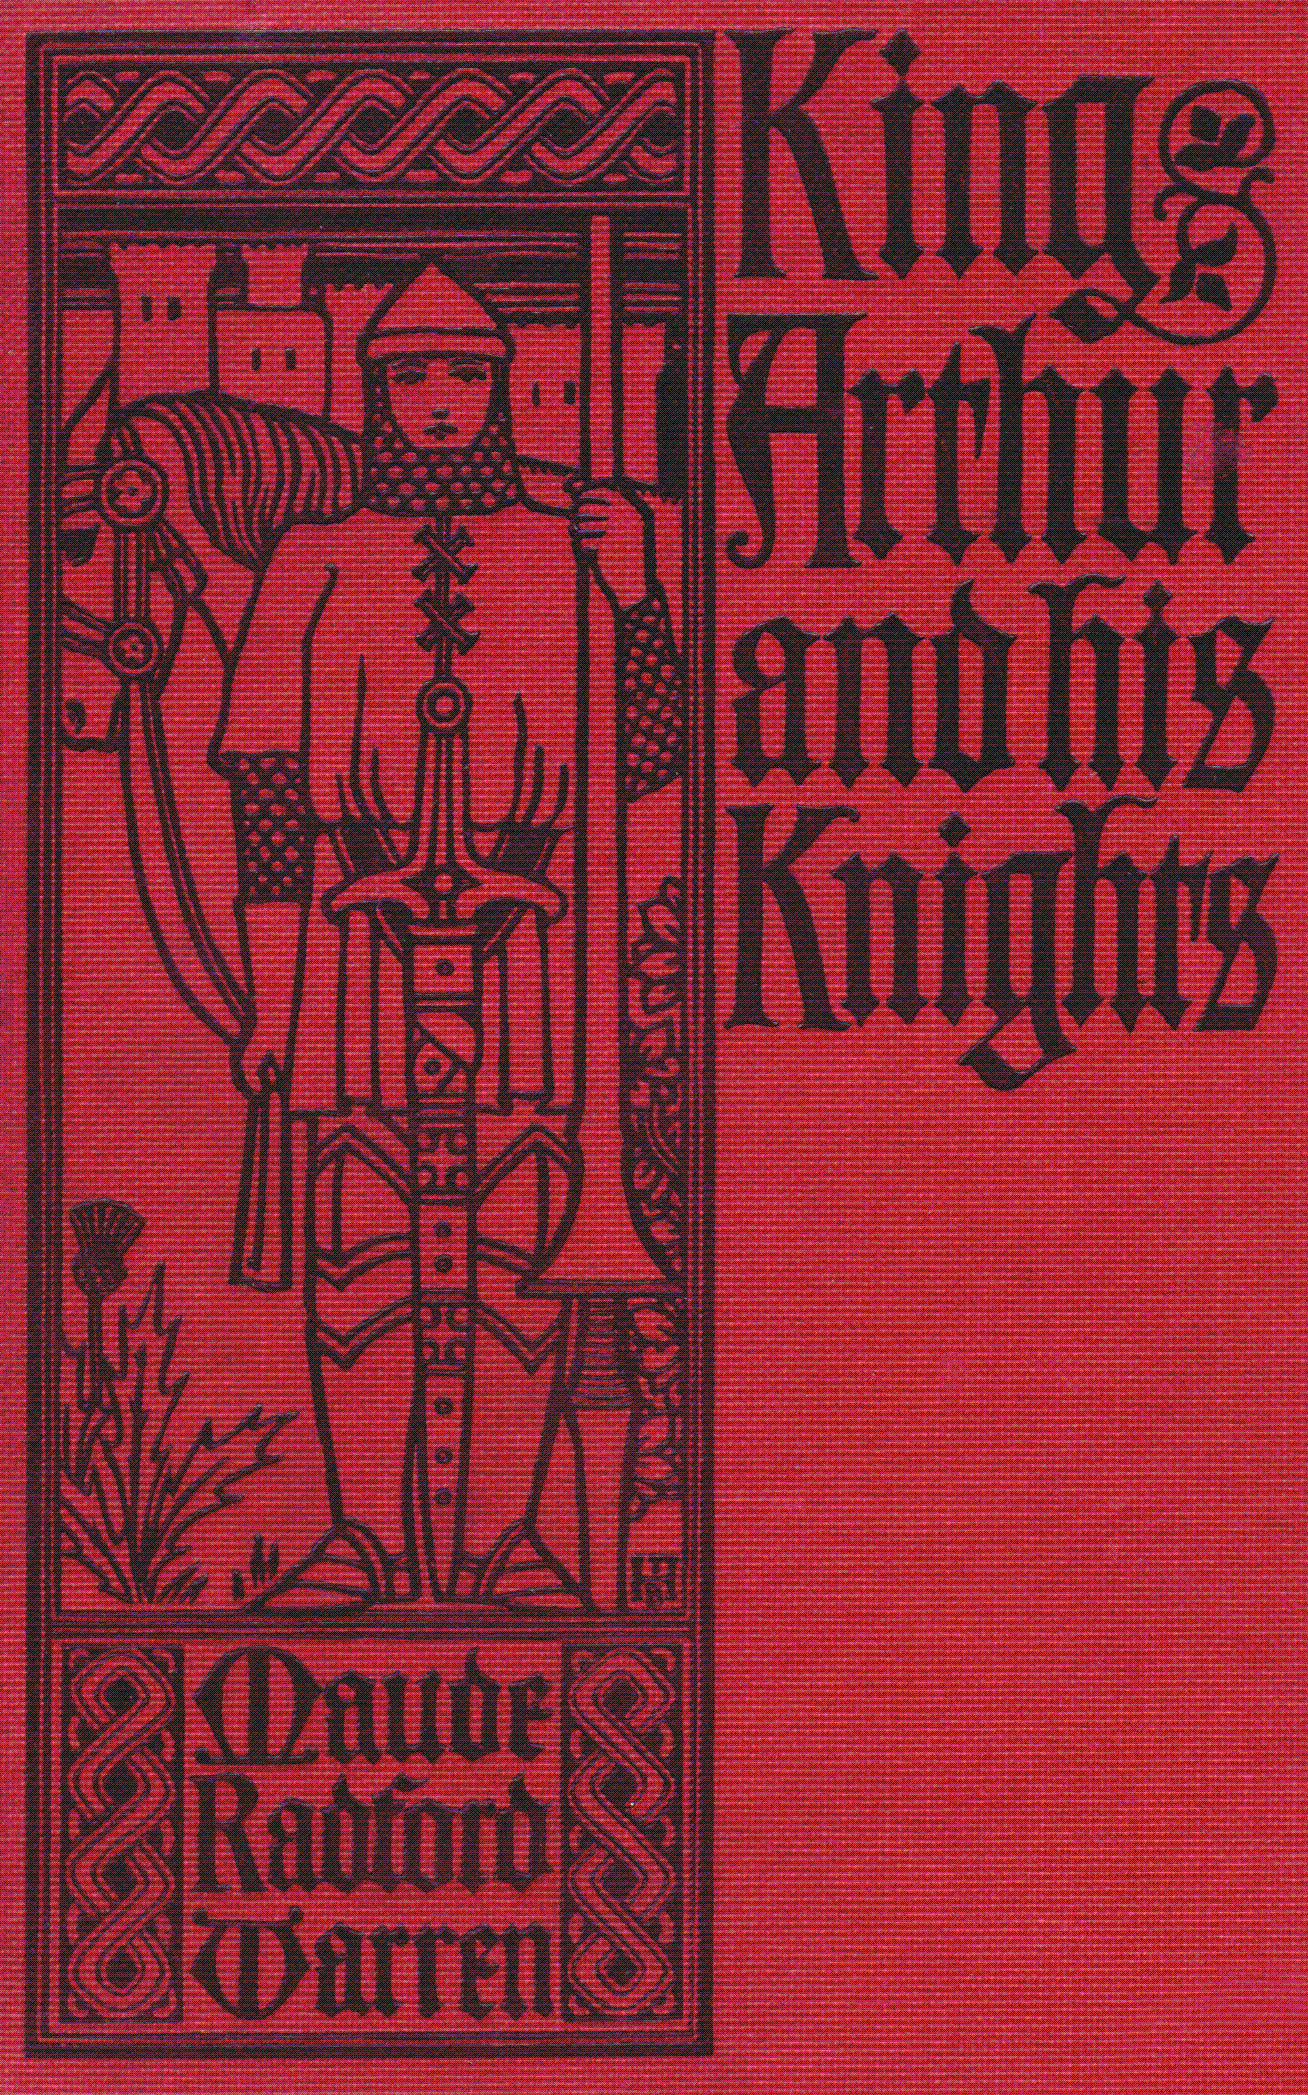 [Front Cover] from King Arthur and His Knights by Maude R. Warren